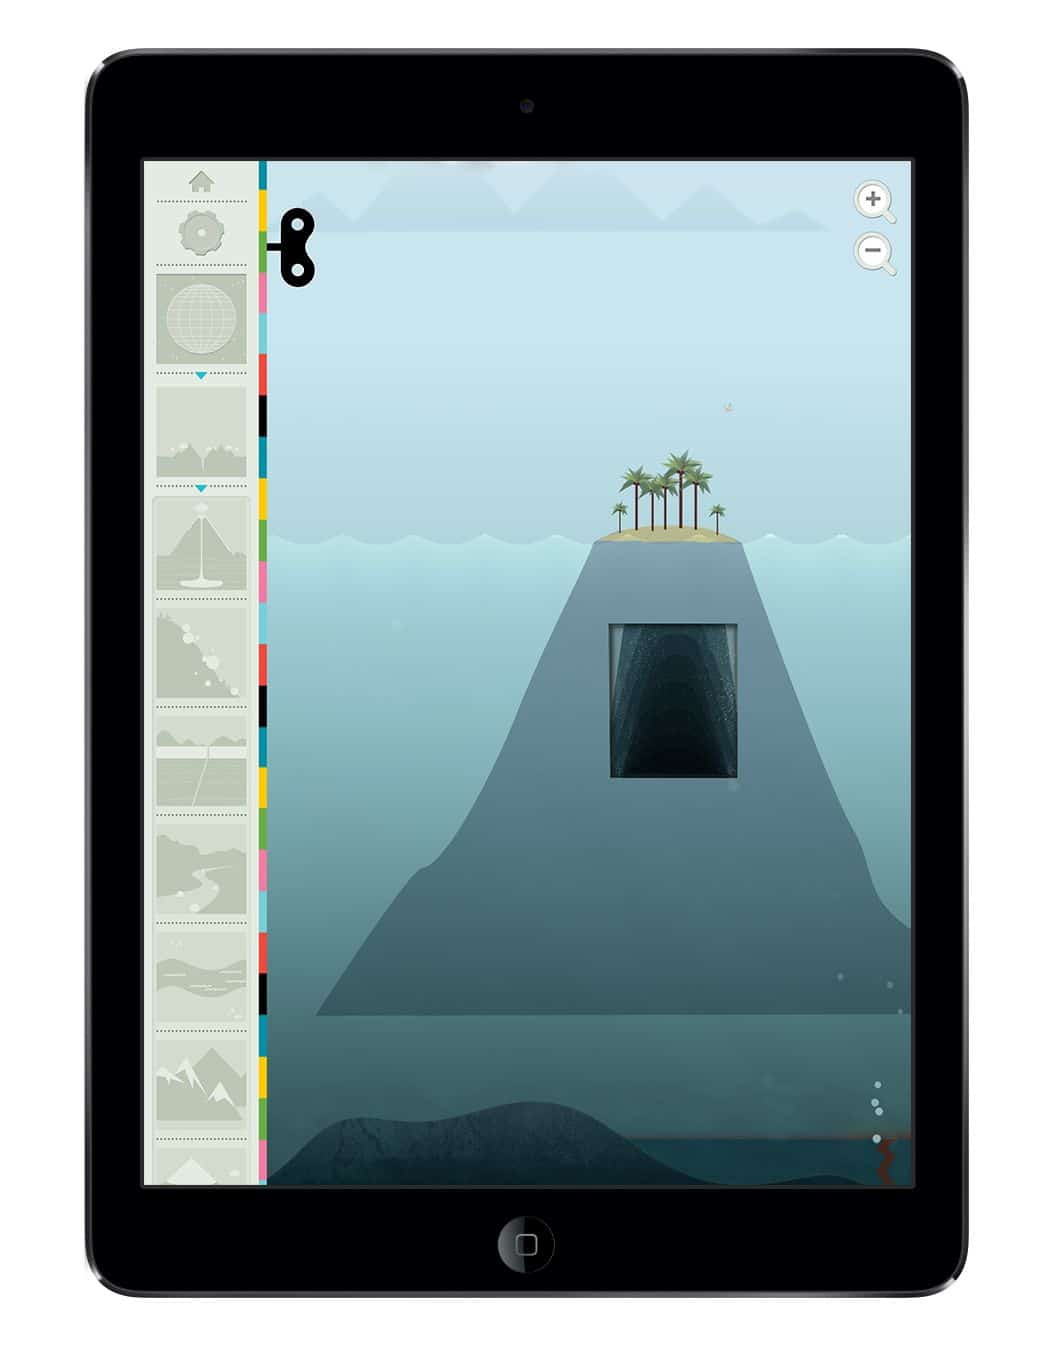 Screenshot of the beautifully illustrated app UI design of The Eart on iPad.